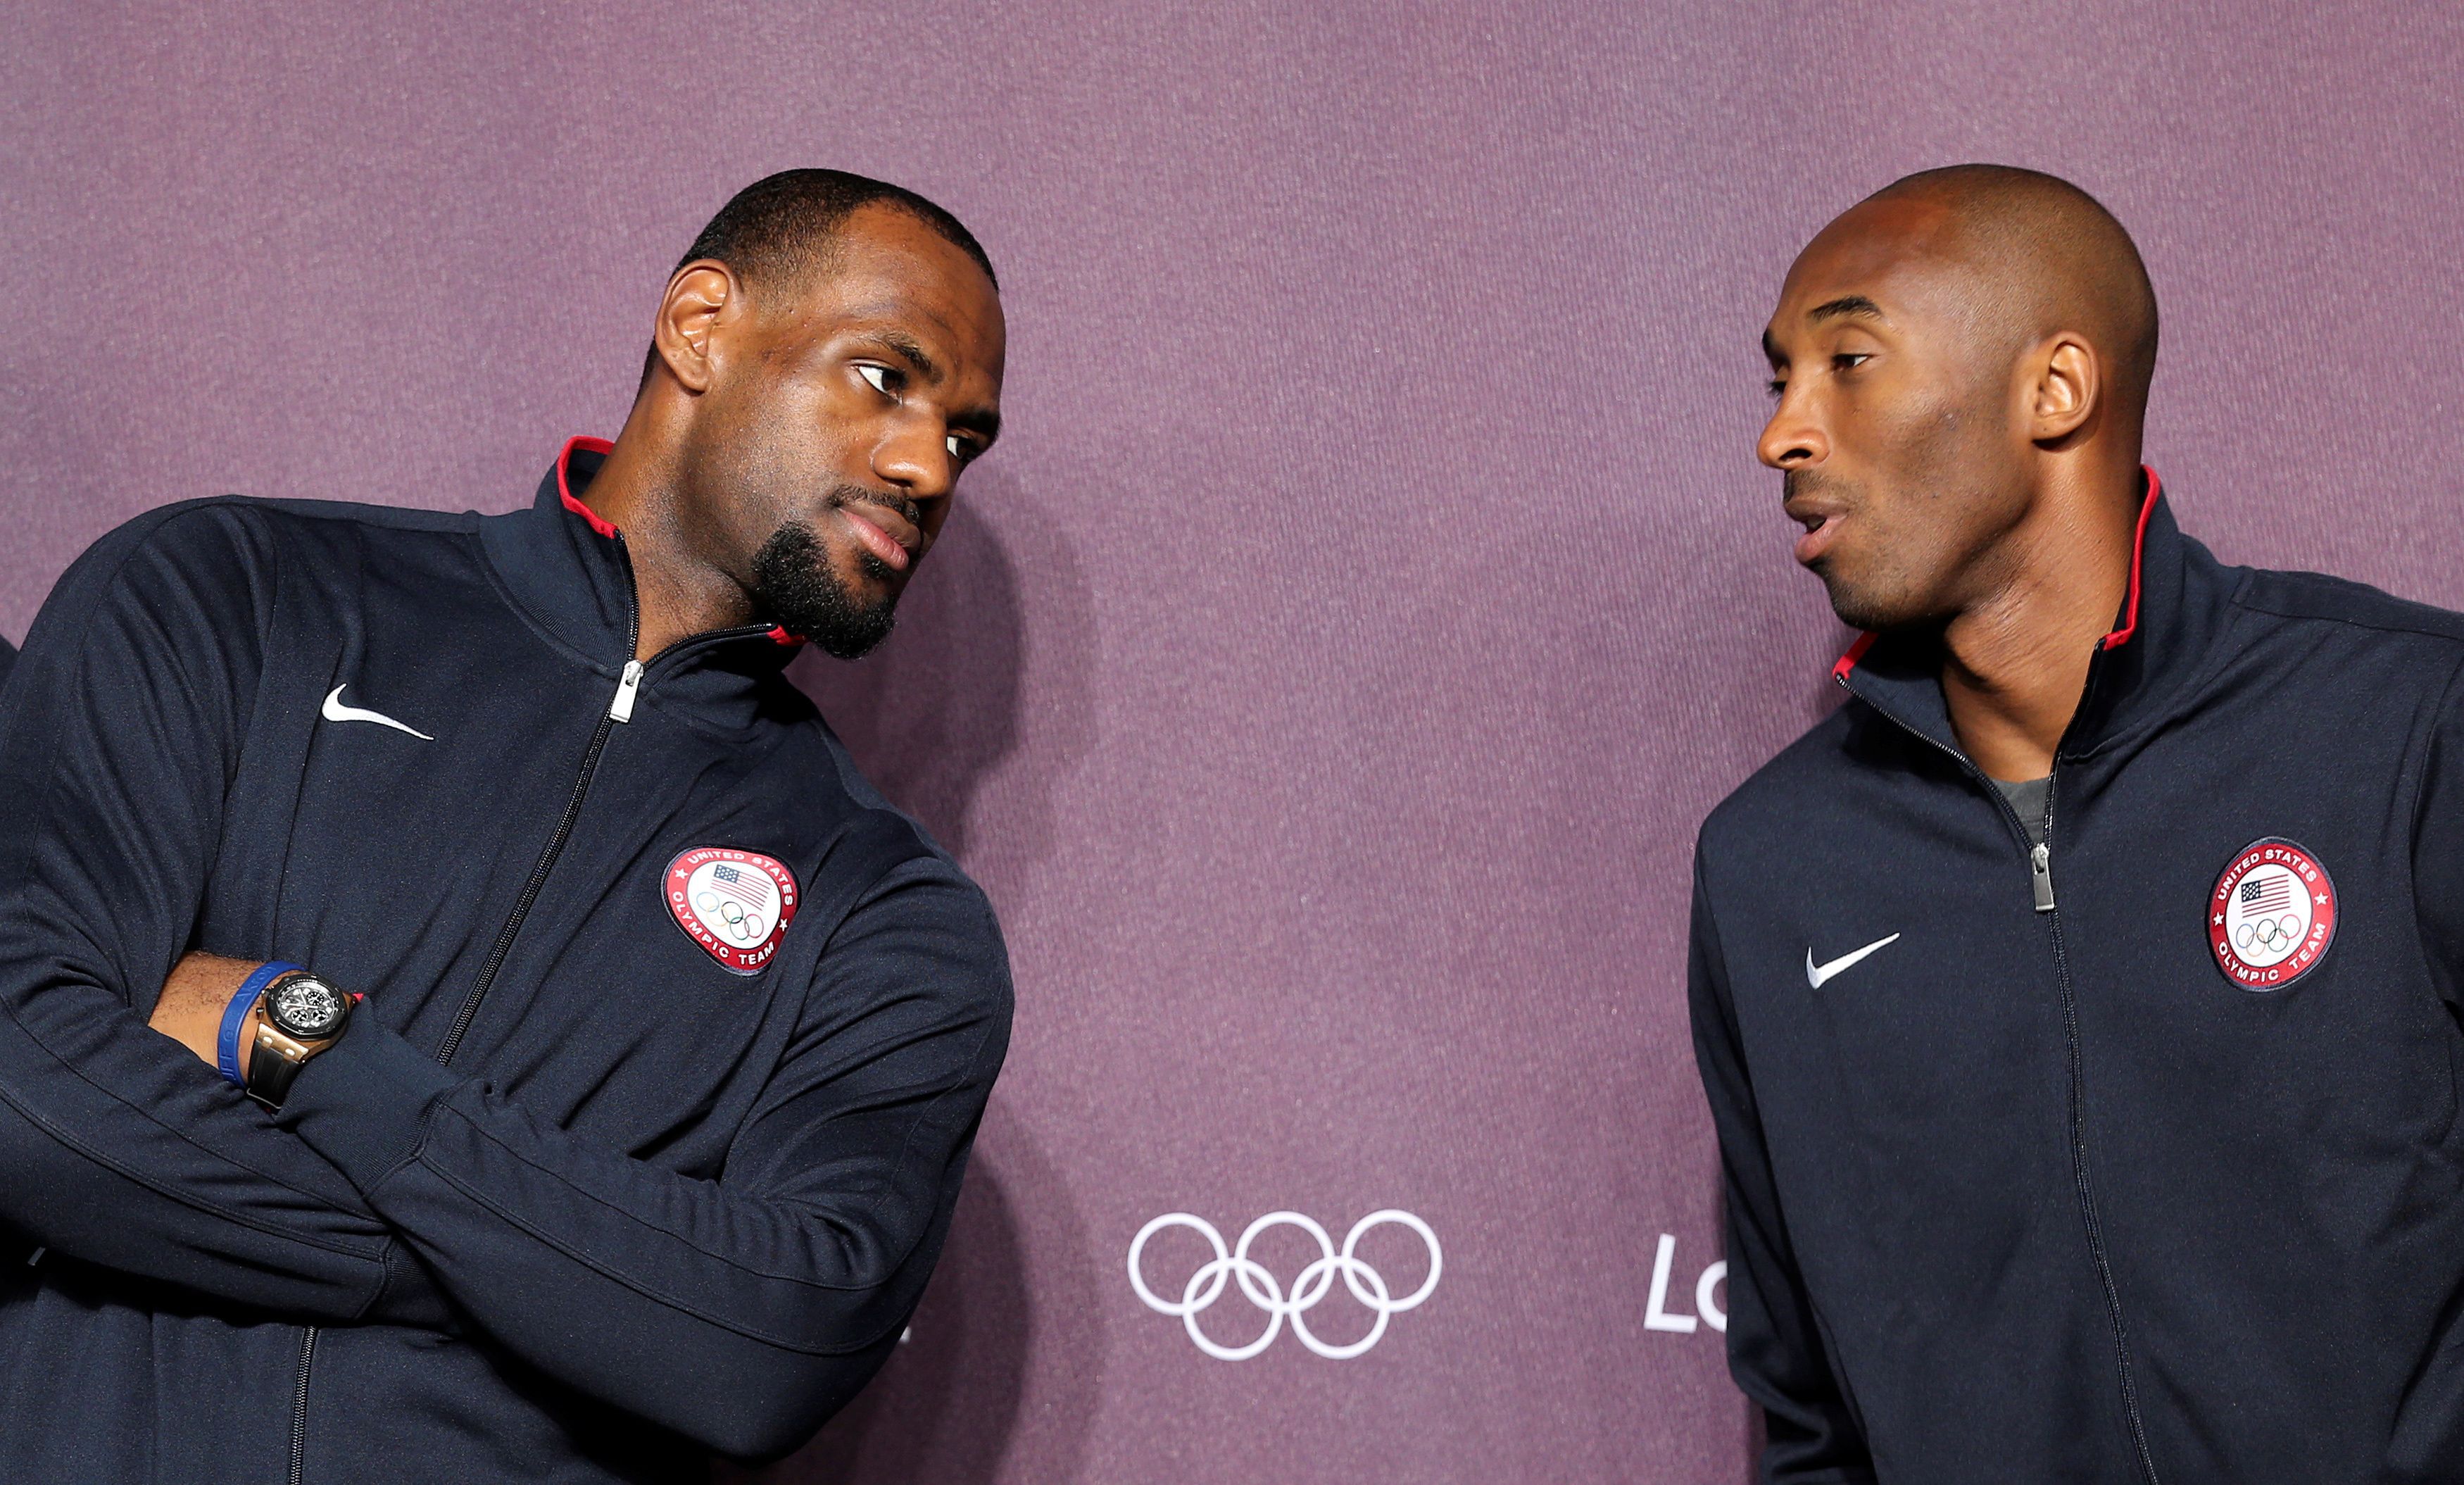 FILE PHOTO: U.S. basketball player Kobe Bryant (R) talks with his teammate LeBron James during a news conference in the Olympic media centre before the start of the London 2012 Olympic Games, Britain July 27, 2012. REUTERS/Stefano Rellandini/File Photo